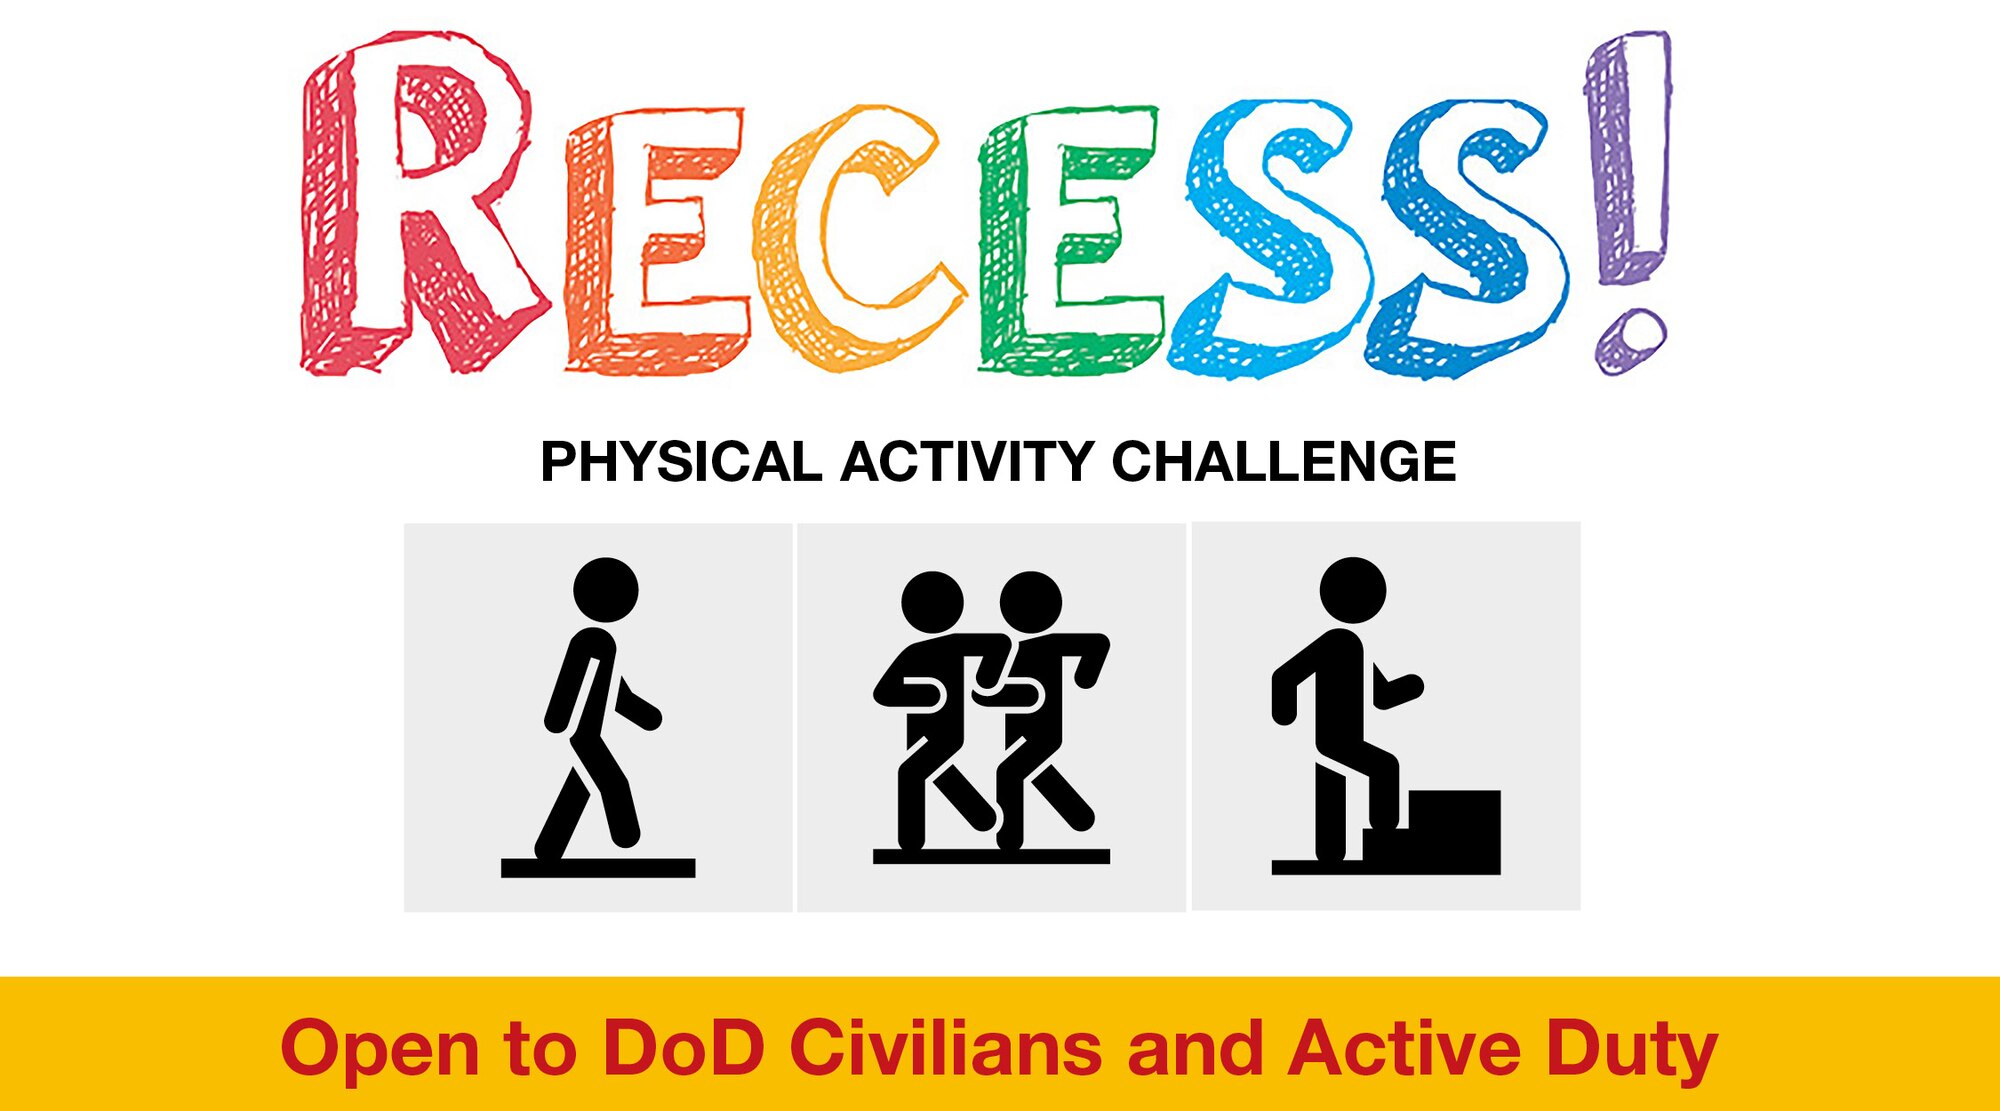 RECESS! physical activity challenge